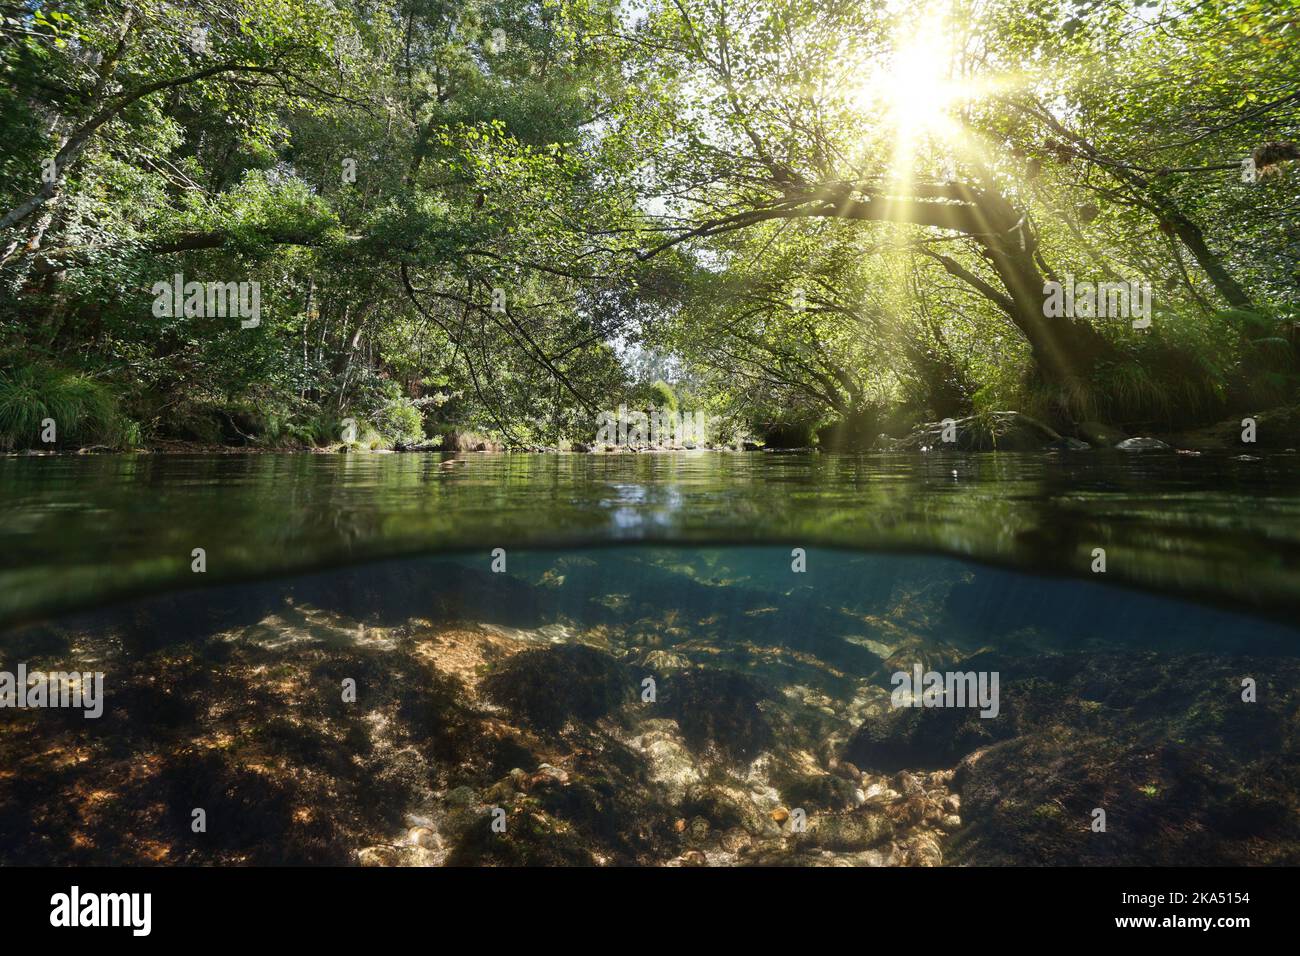 River with sunlight and trees foliage, split level view over and under water surface, Spain, Galicia Stock Photo